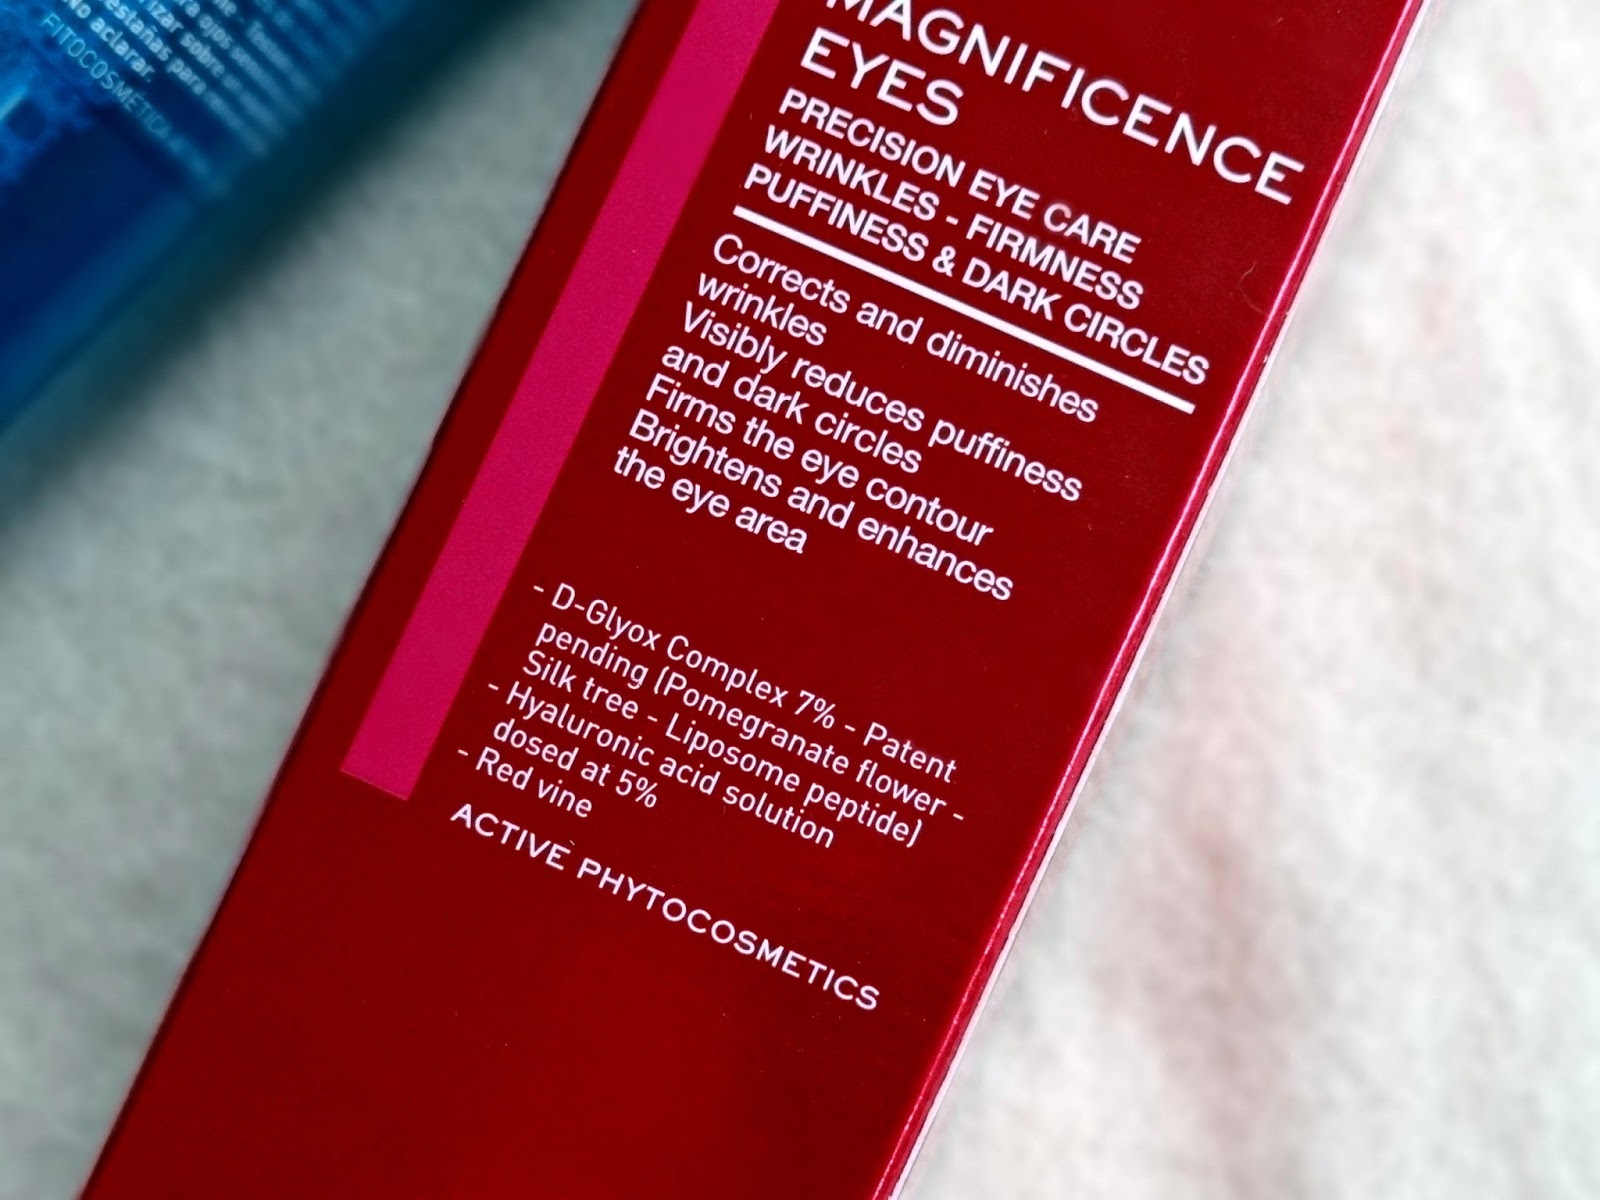 Magnificence Precision Eye Care Review, Photos, Anti Aging Eye Care fragrance free from Lierac